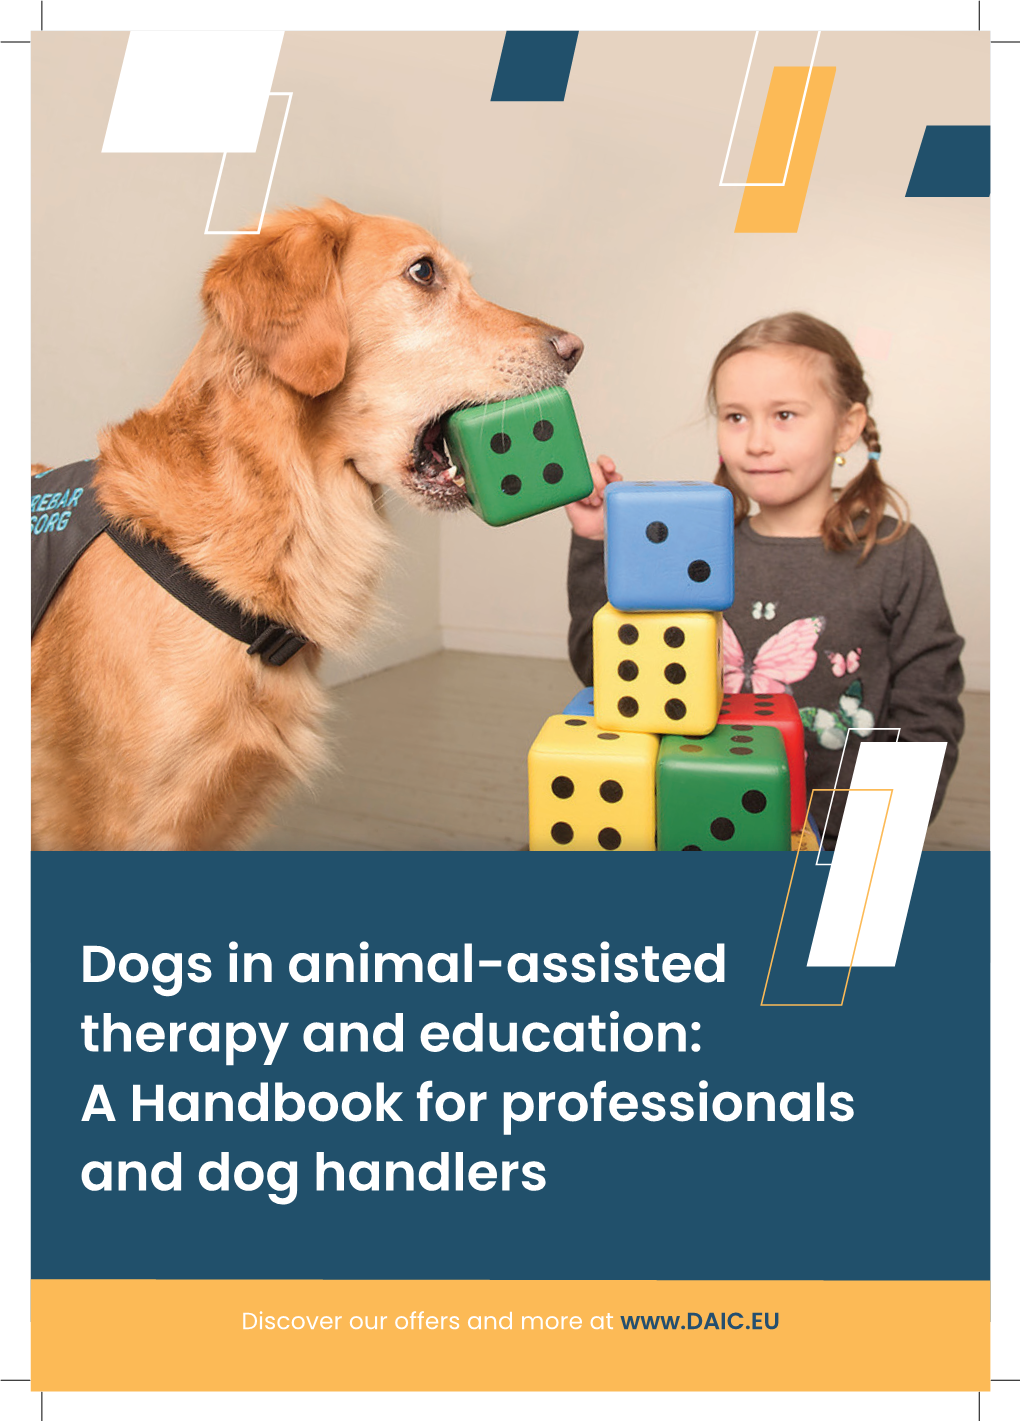 Dogs in Animal-Assisted Therapy and Education: a Handbook for Professionals and Dog Handlers